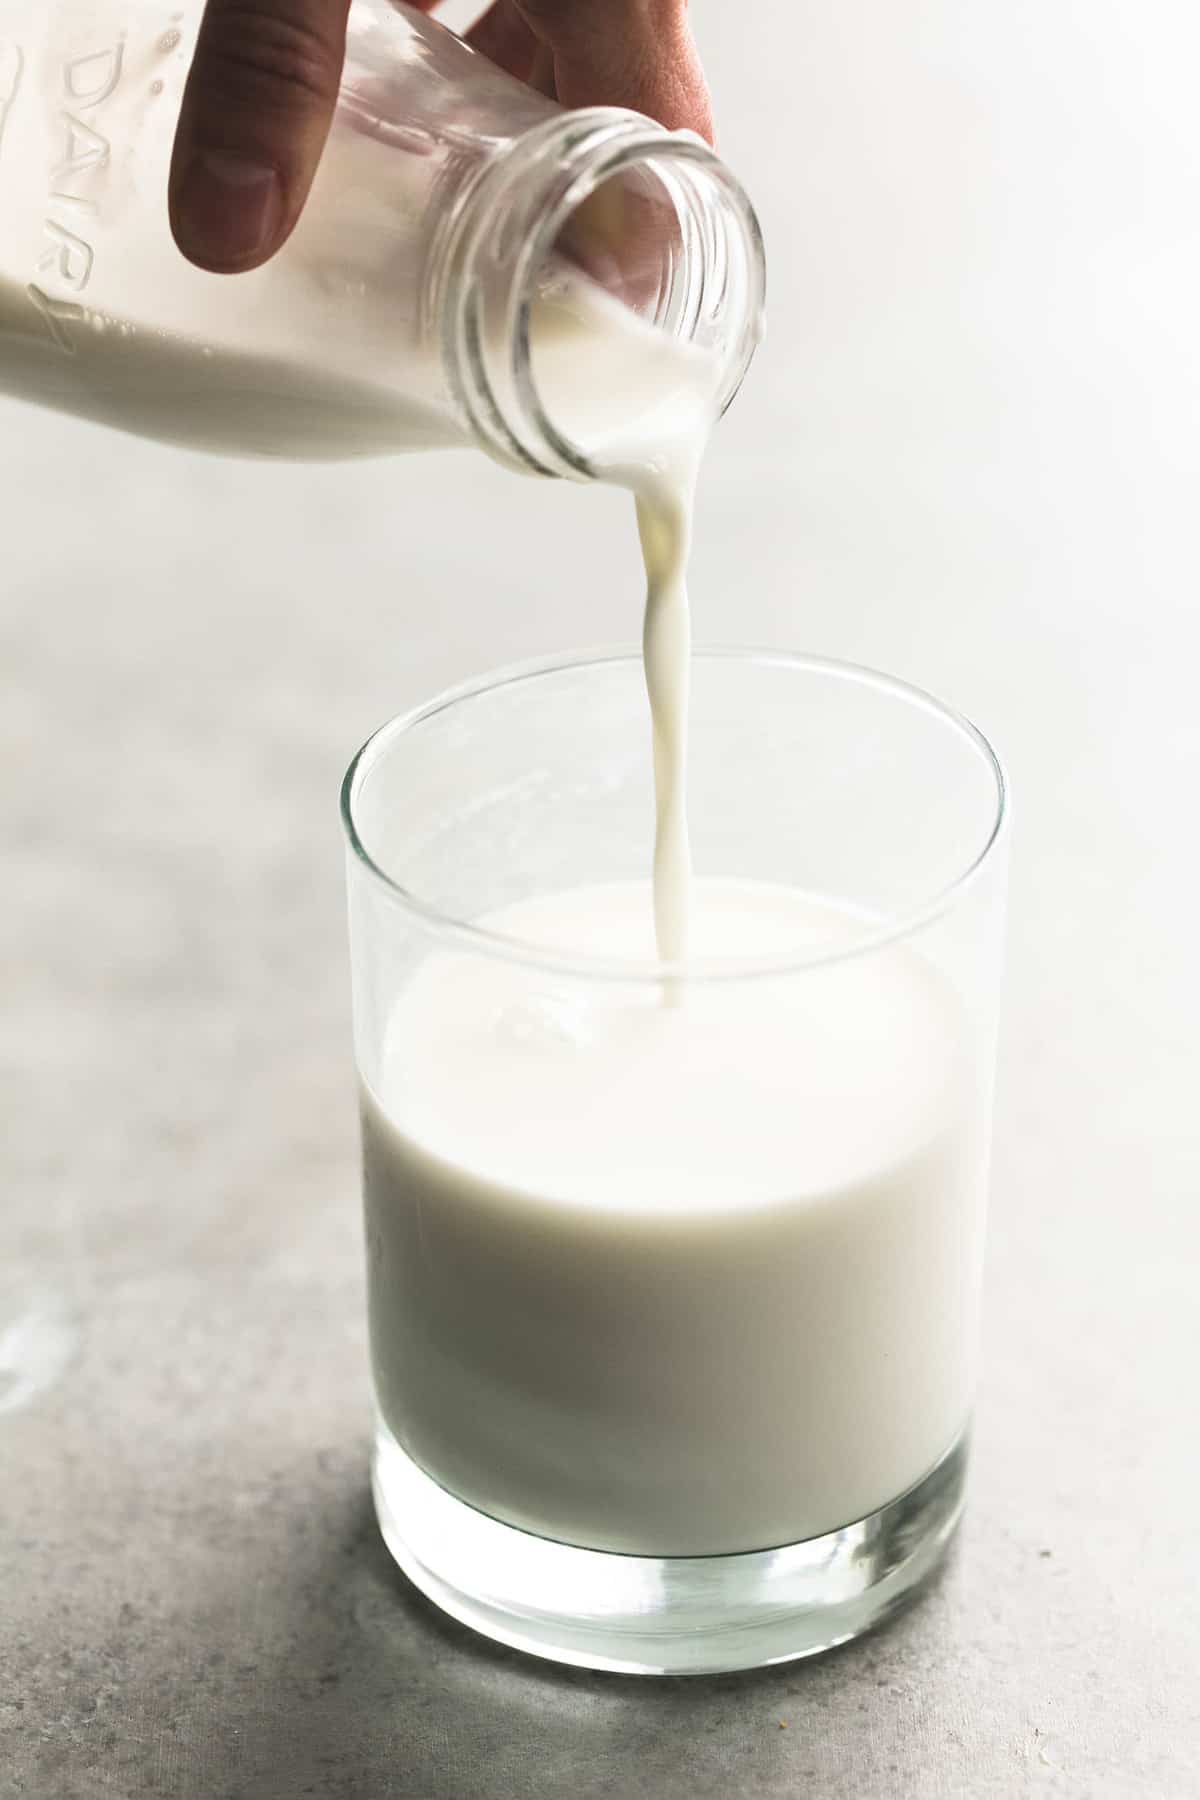 a hand pouring a jar of milk into a glass.